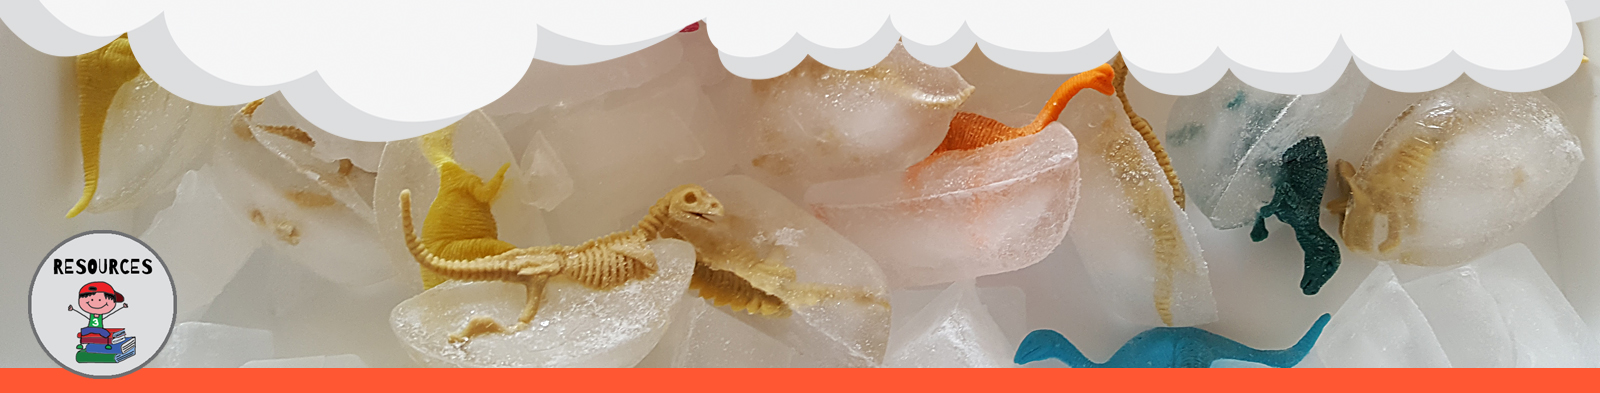 dinosaurs in ice